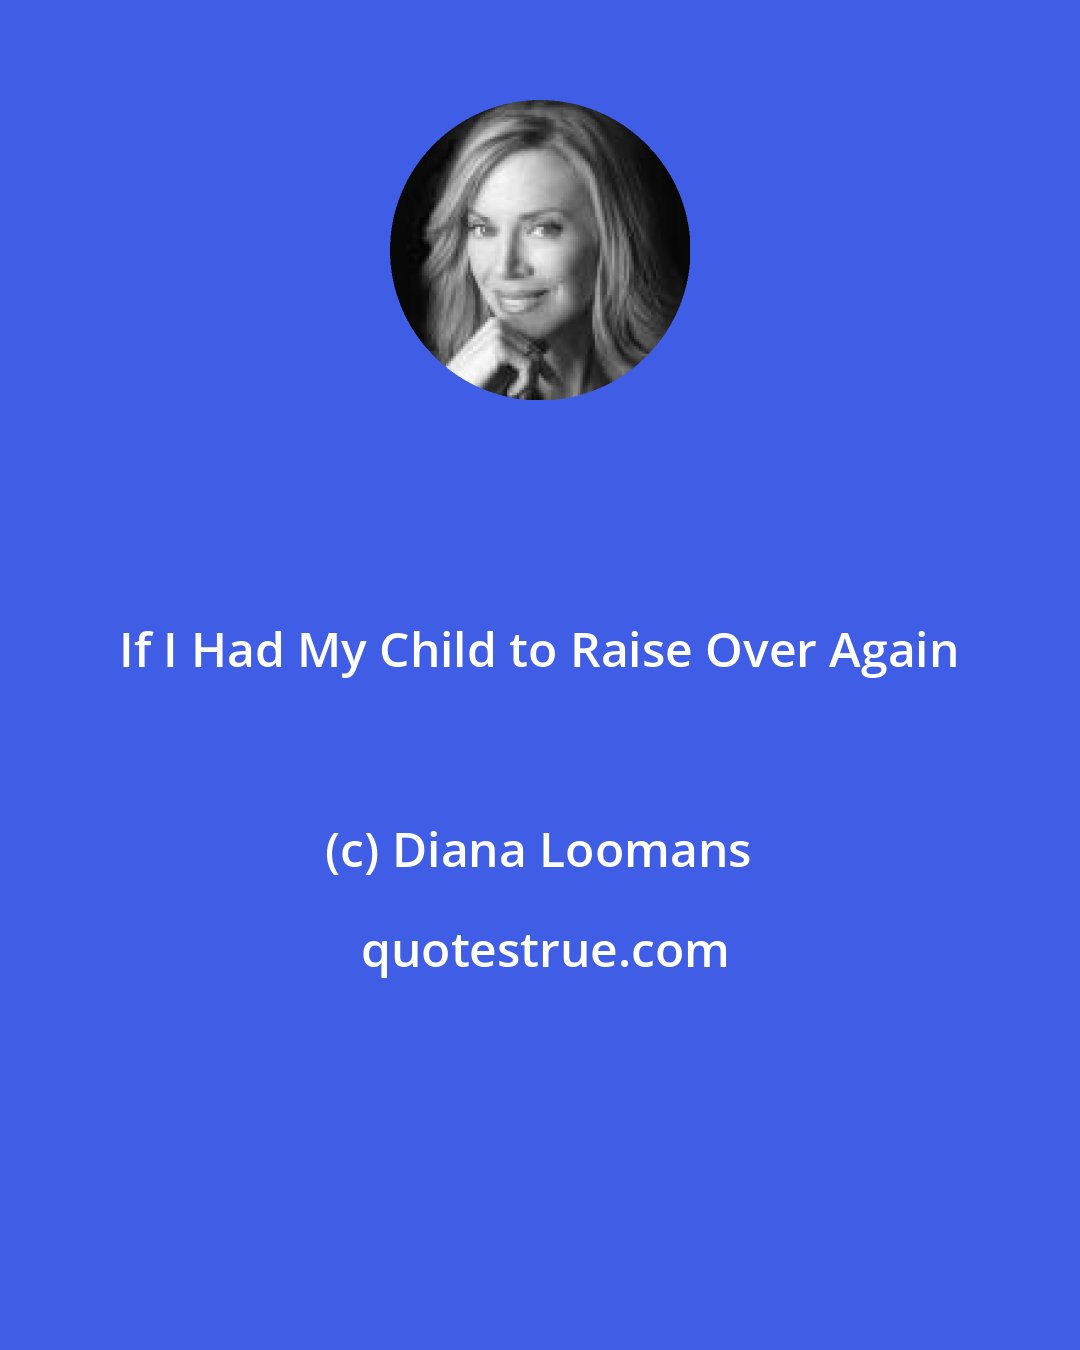 Diana Loomans: If I Had My Child to Raise Over Again